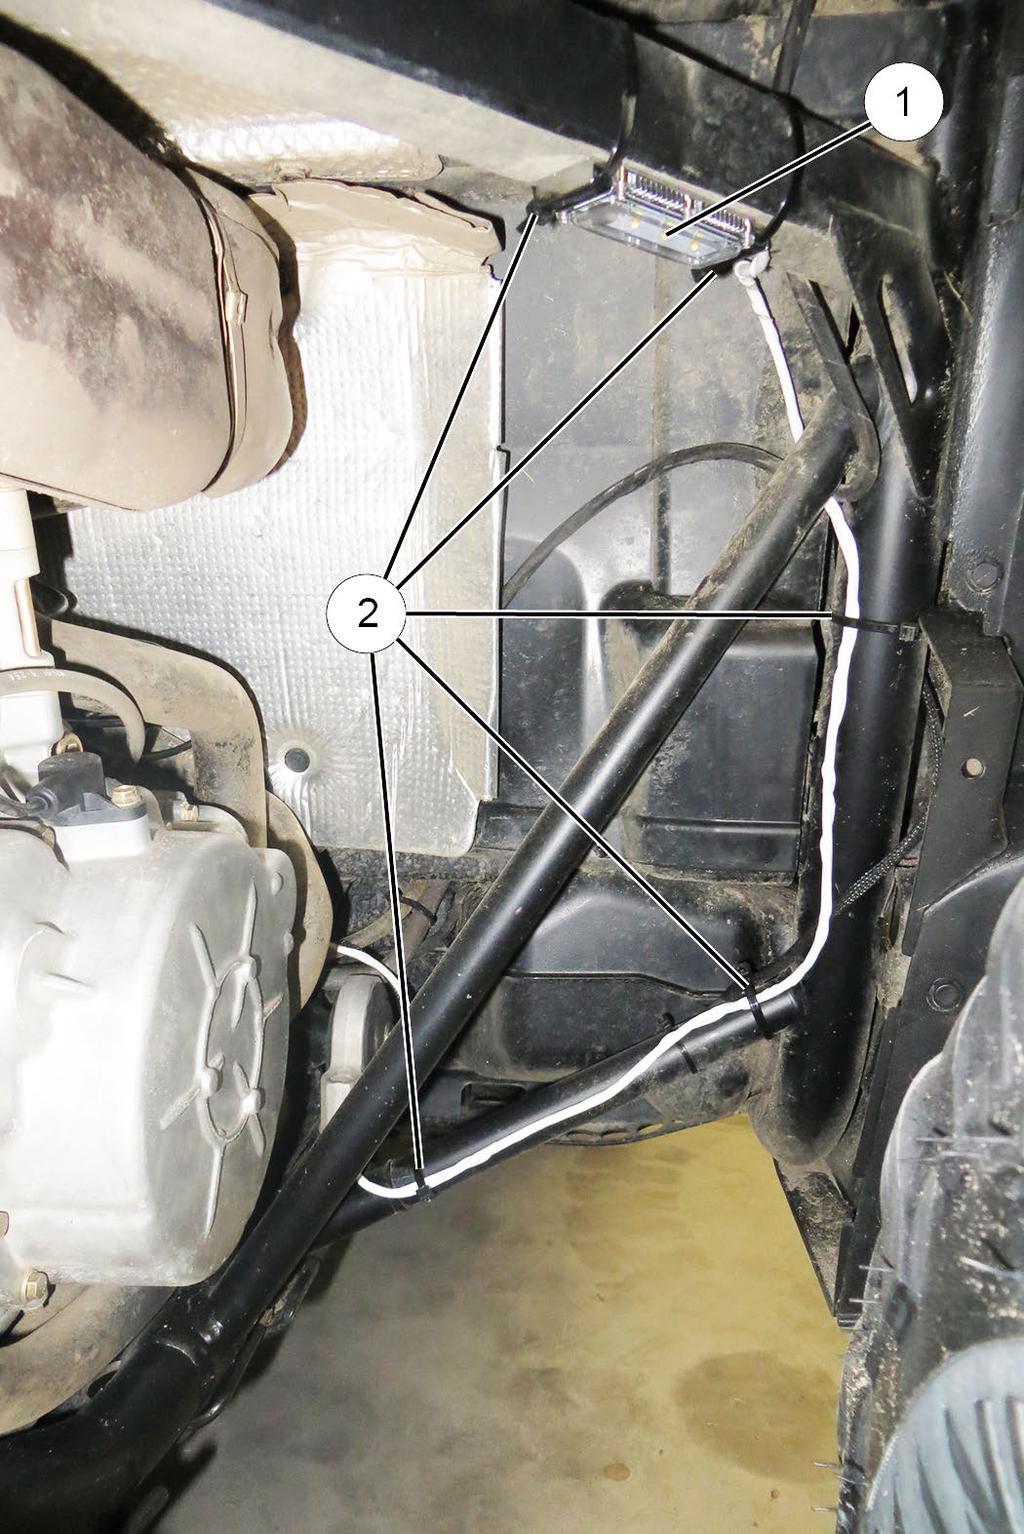 Route light harness down and inboard to vehicle centerline as previously shown, then follow main vehicle harness forward through center console. c. Exit center console near accent light electrical d.